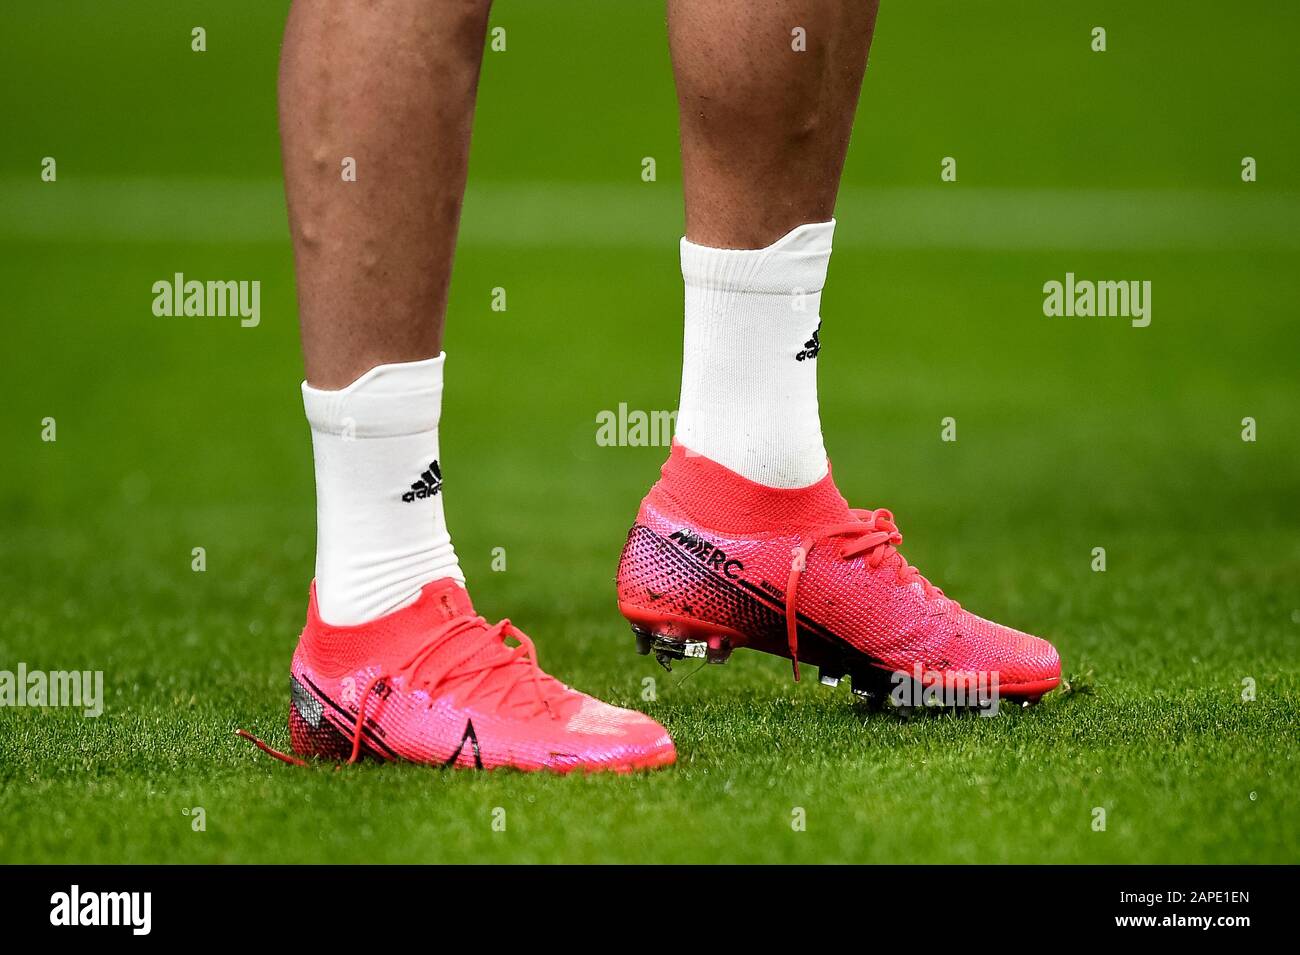 Turin, Italy - 22 January, 2020: Boots of Cristiano Ronaldo of Juventus FC  are seen during warm up prior to the Coppa Italia football match between  Juventus FC and AS Roma. Credit: